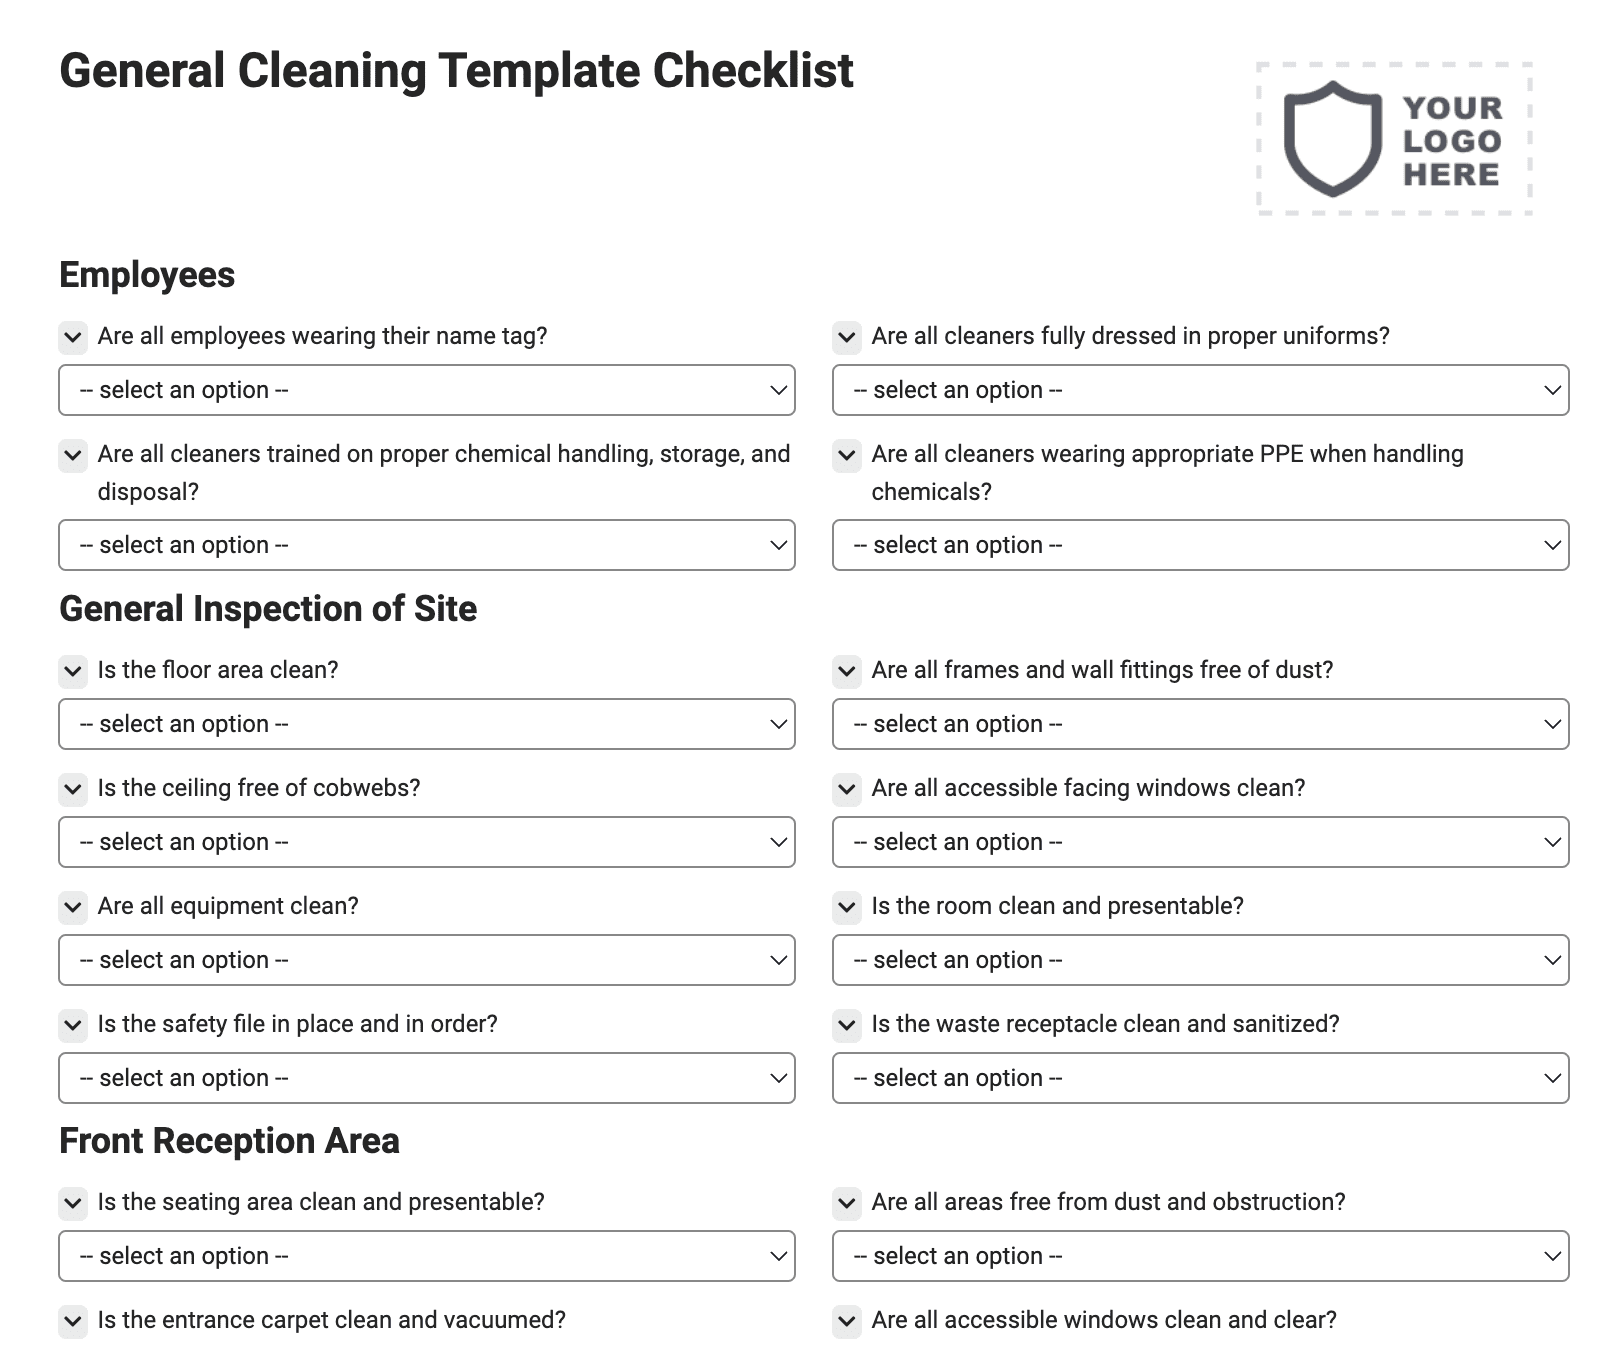 General Cleaning Template Checklist